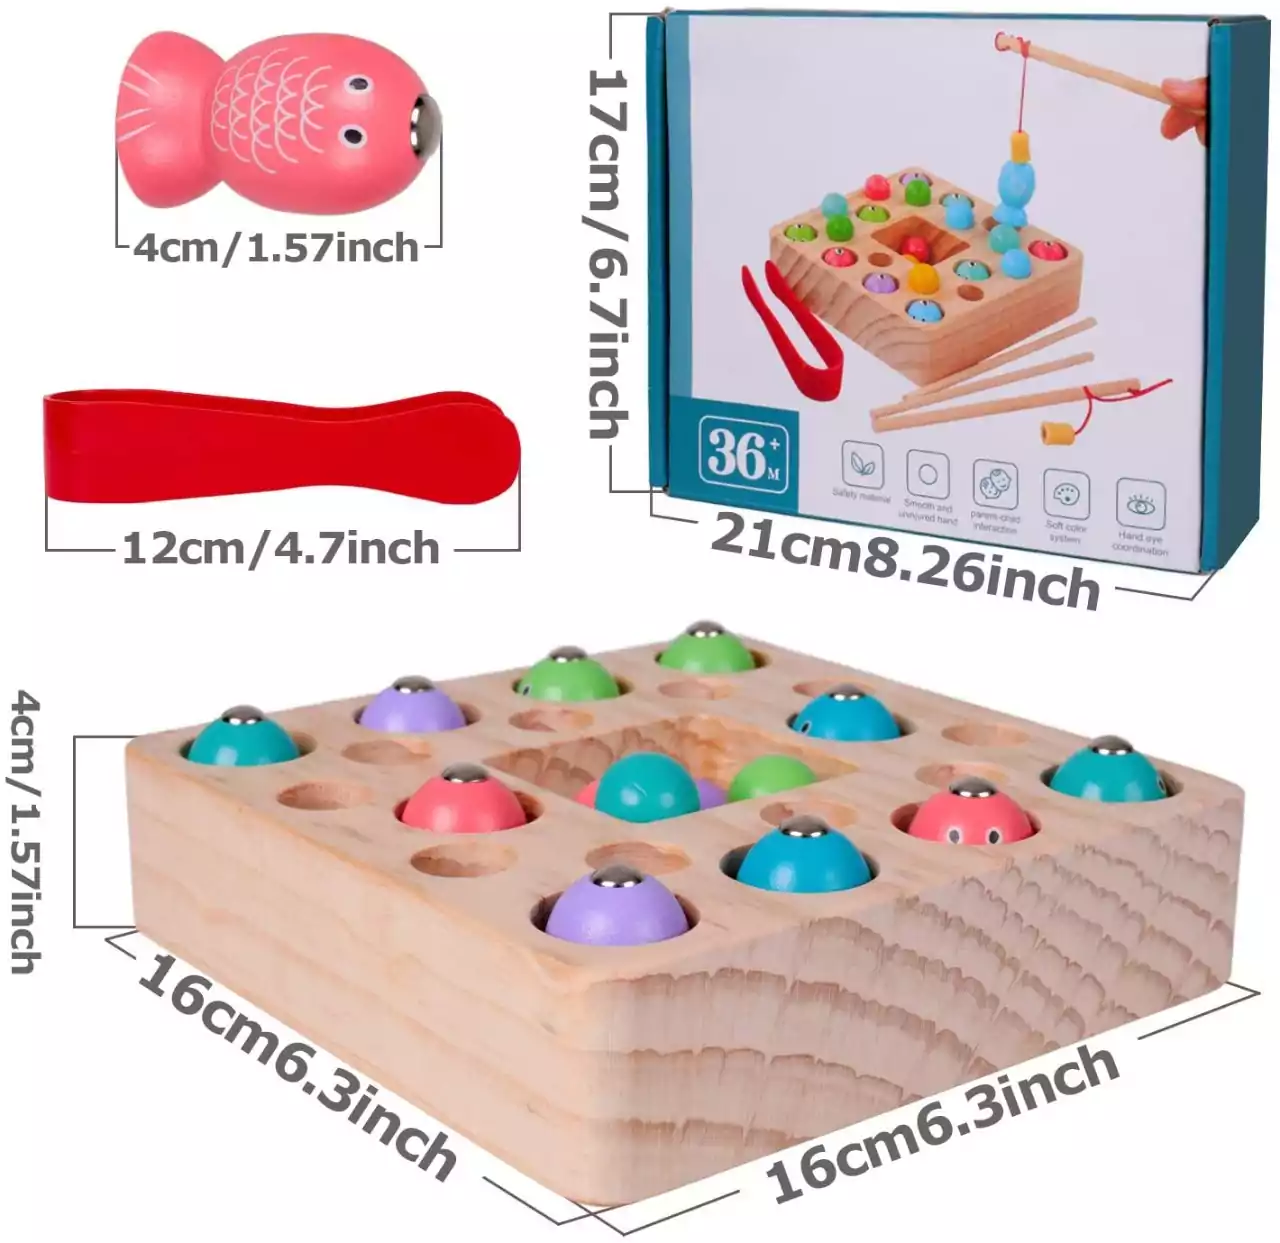 3 in 1 Wooden Magnetic Fishing Game - Buy Educational Toys Online - Odeez  Toy Store